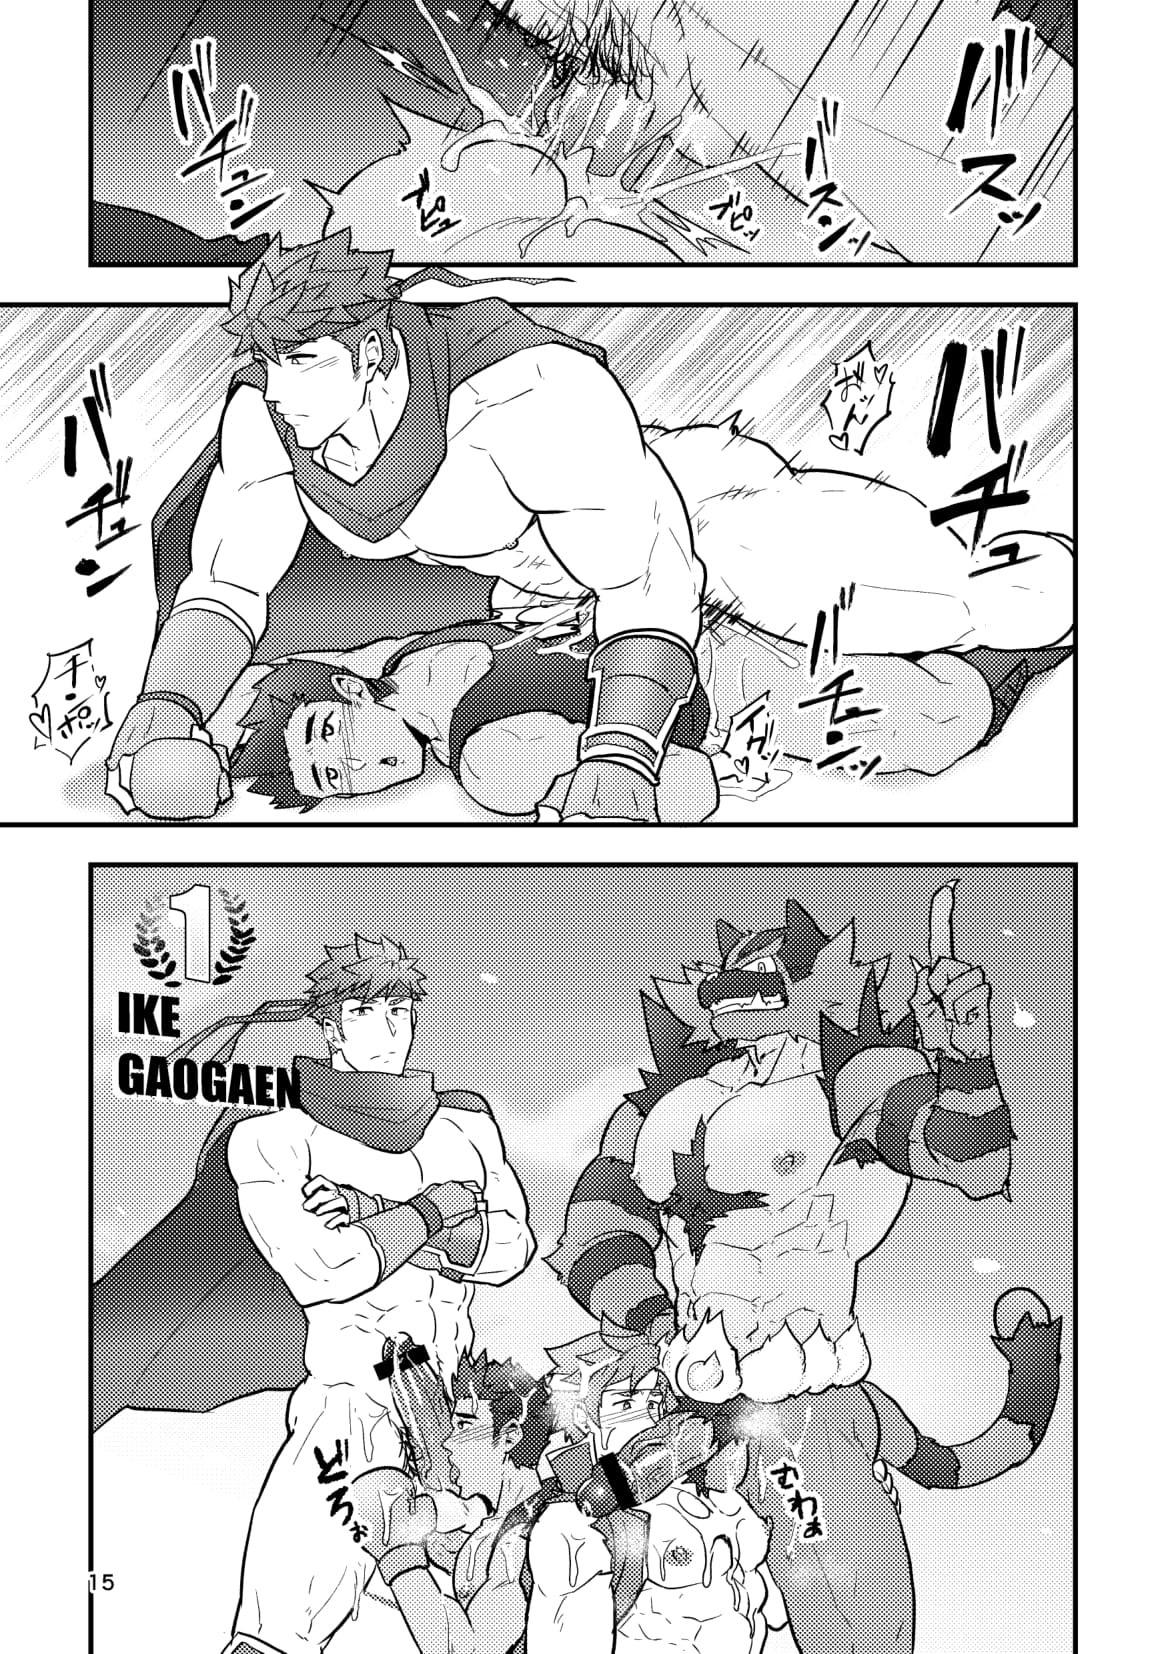 Tight Ass Onabe Hon C95 - The idolmaster Fate grand order Granblue fantasy Pokemon Fire emblem Castlevania Dragalia lost Punch out Titjob - Page 15